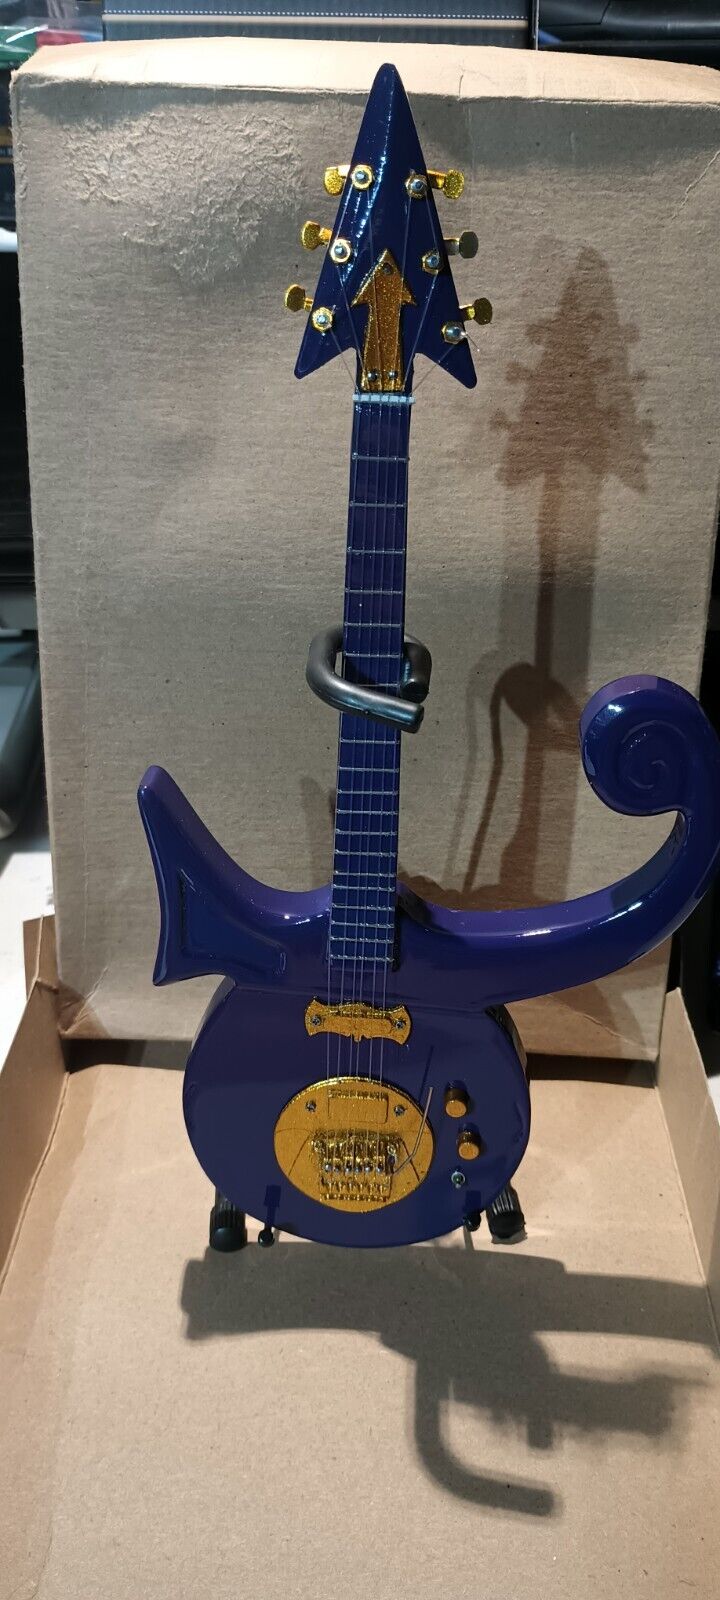 Axe Heaven miniature guitar (Prince or Artist Formerly Known As) 